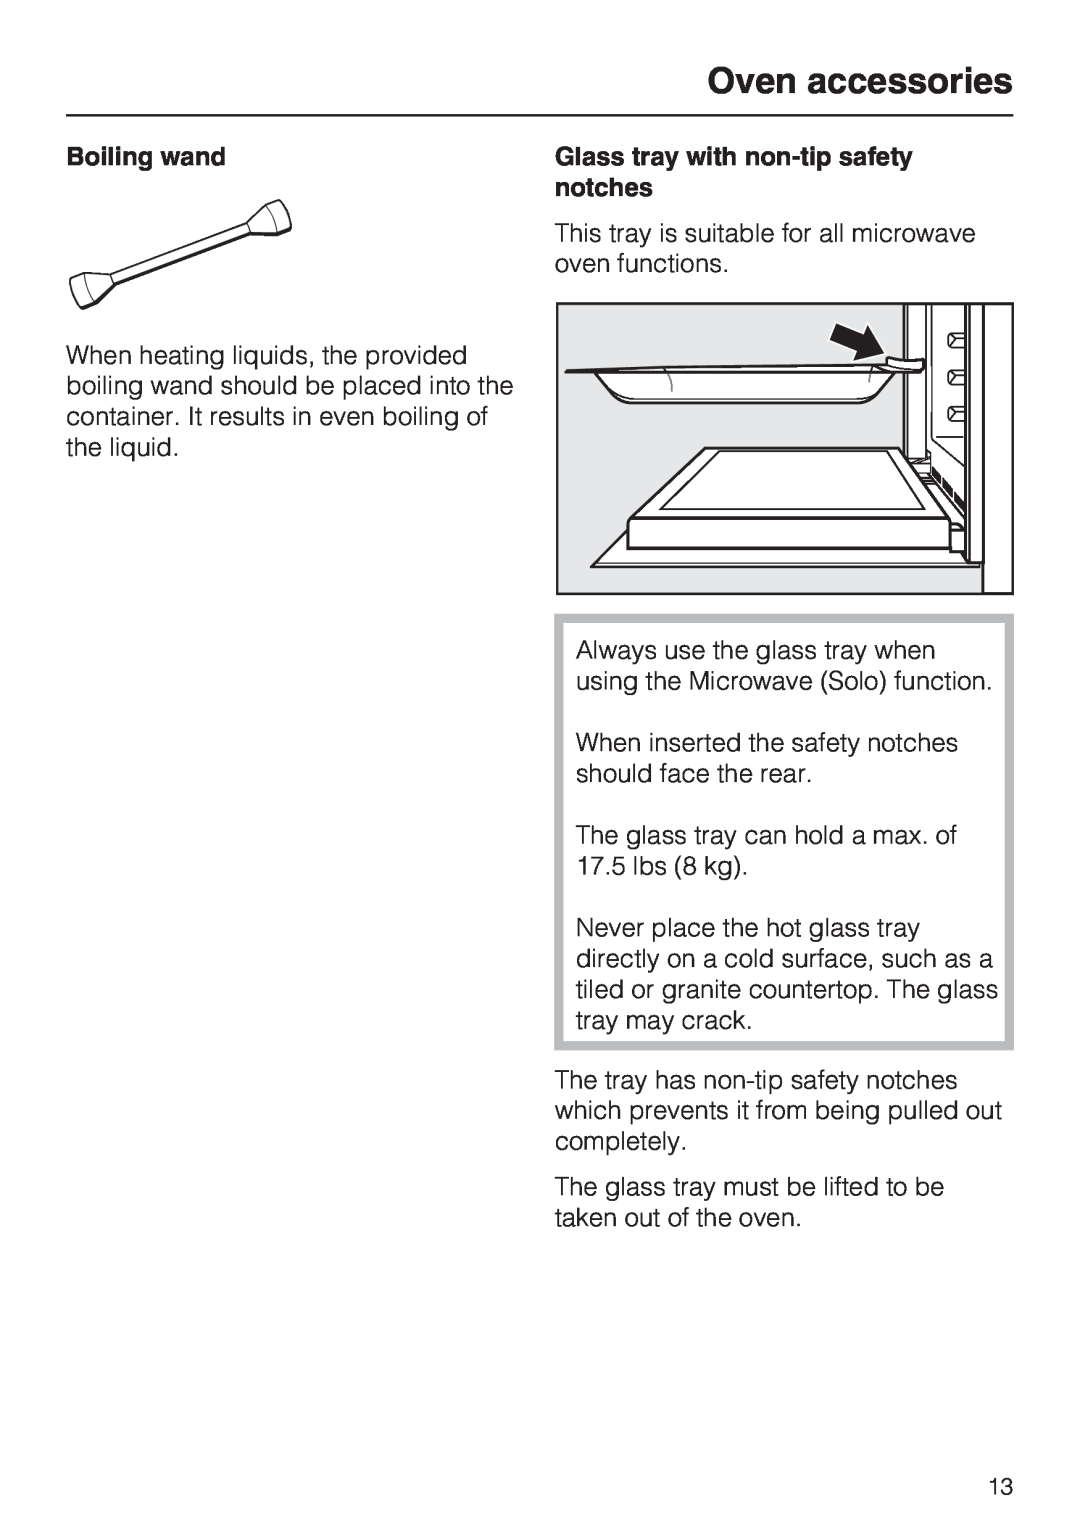 Miele H 4042 BM installation instructions Oven accessories, Boiling wand, Glass tray with non-tip safety notches 